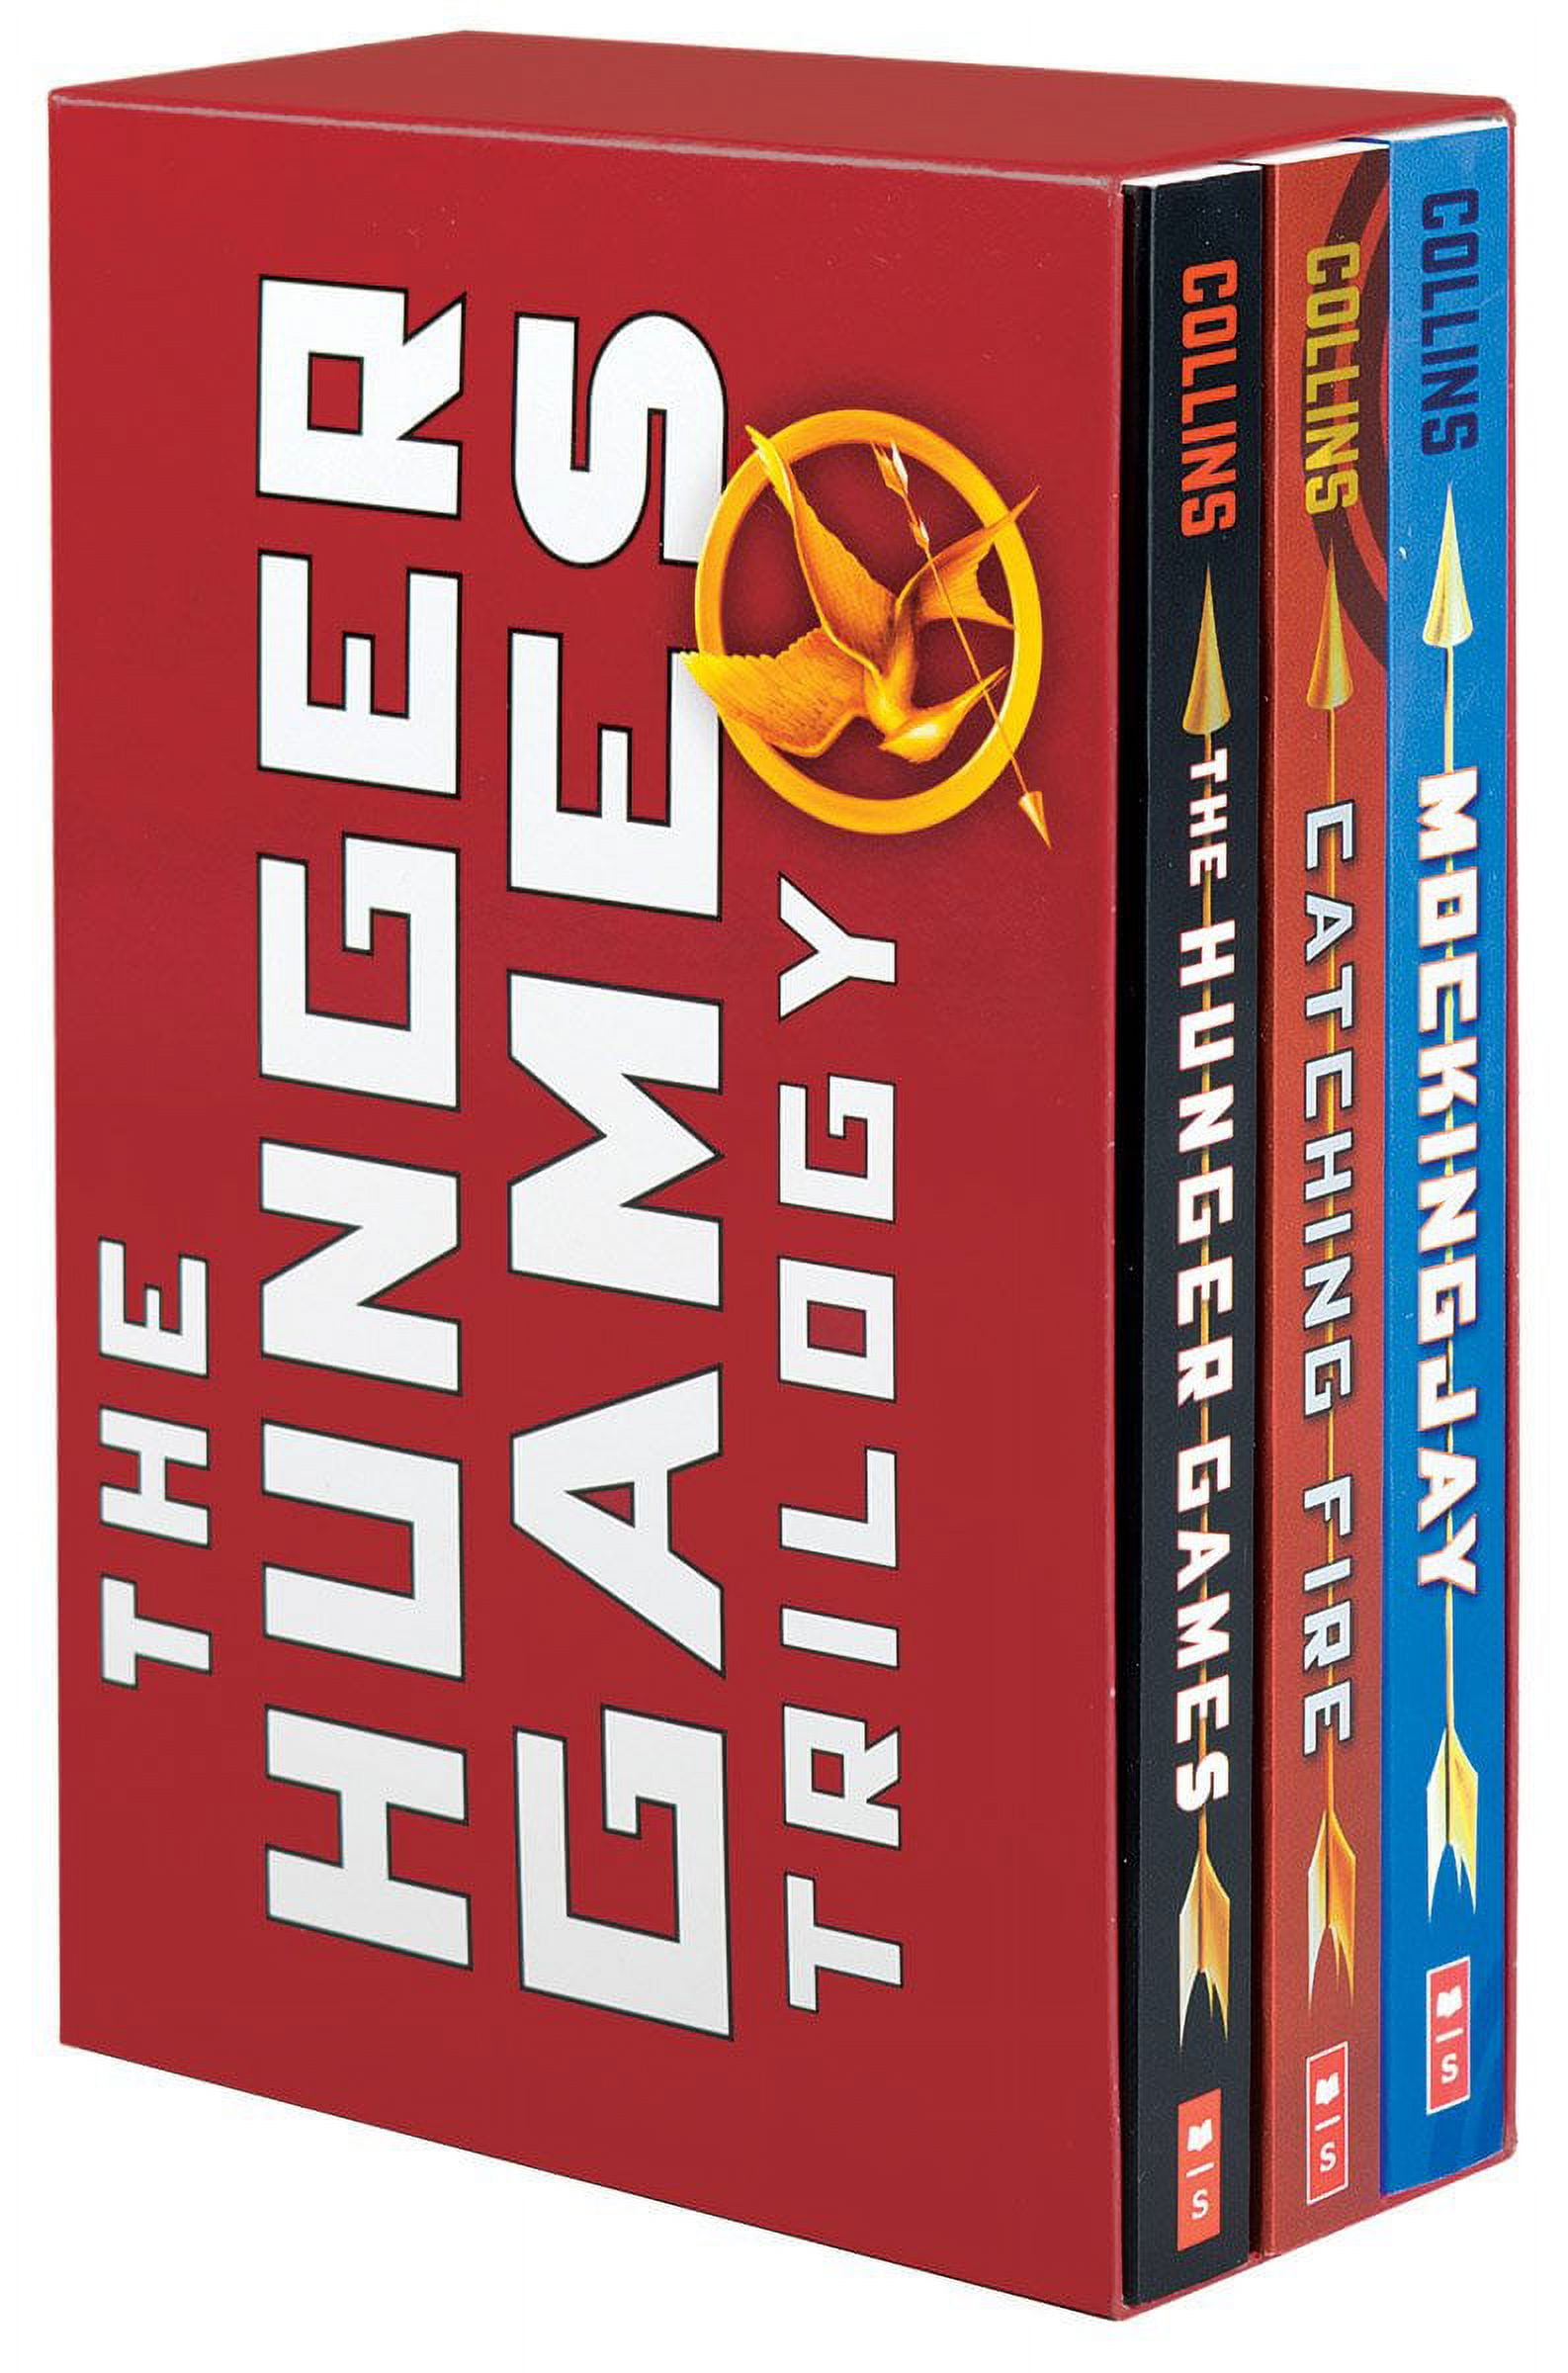 The Hunger Games Set Mixed Book Lot - Scholastic Press - Books 1-3-  Complete Set